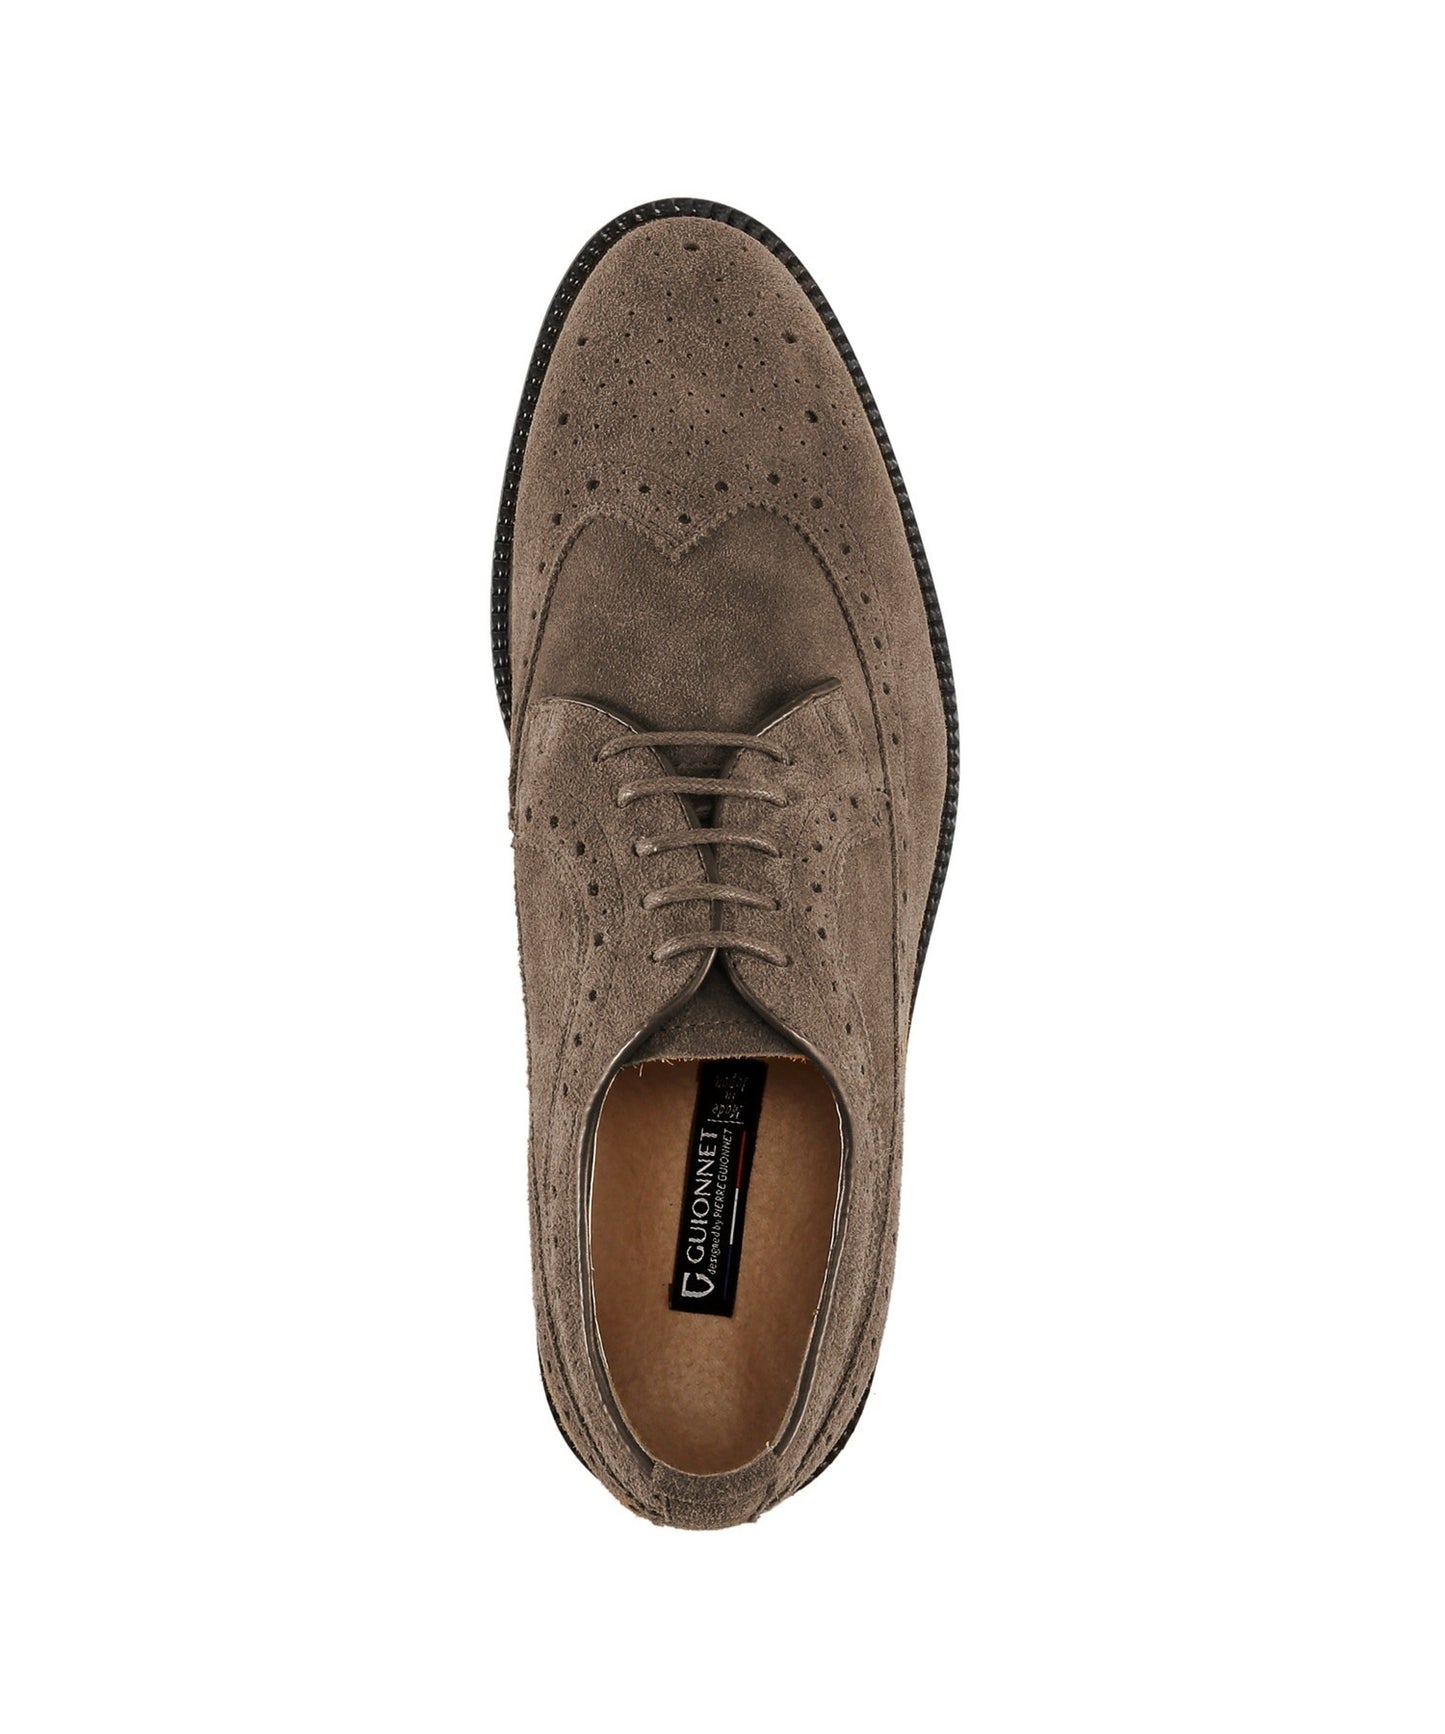 Outer feather full brogue suede shoes